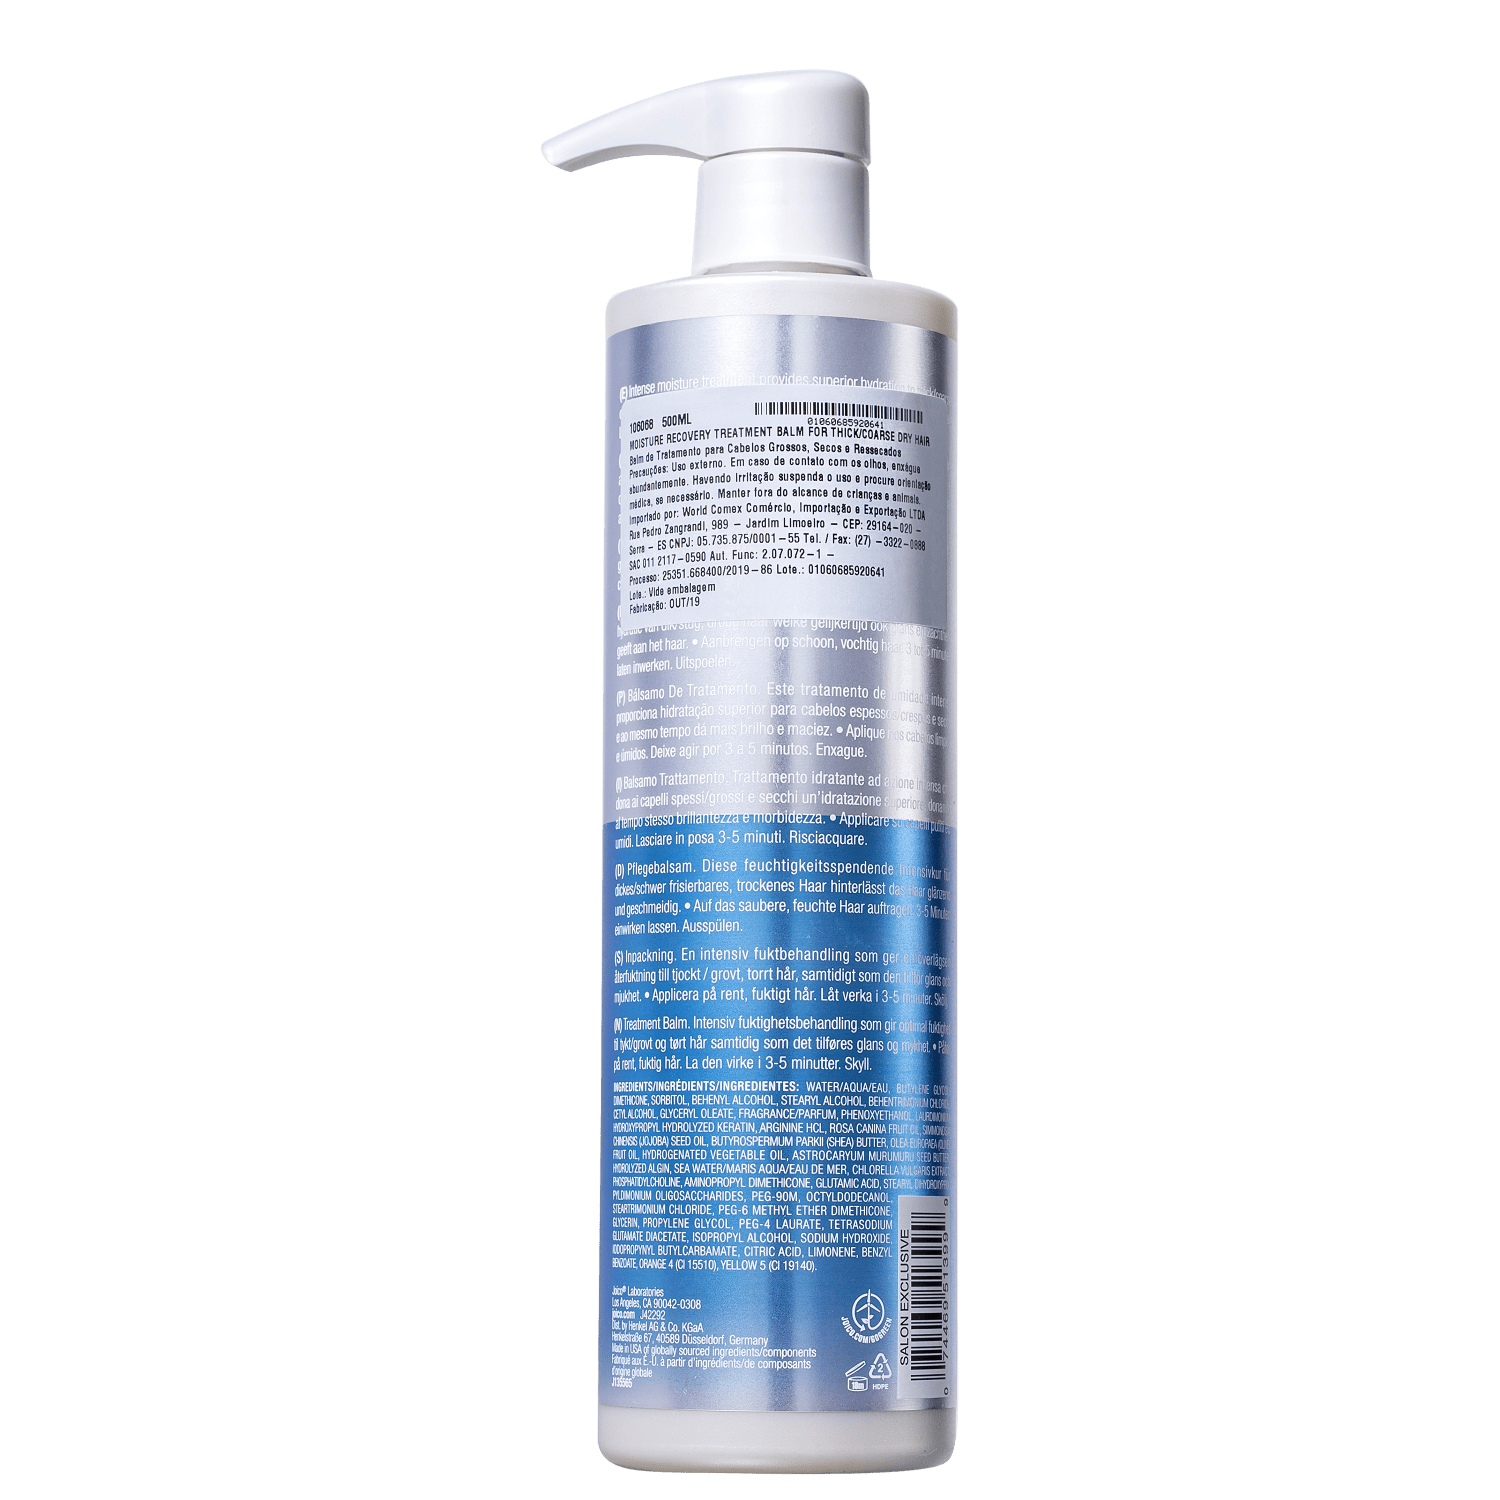 Joico-Moisture-Recovery-Smart-Release-Shampoo-300ml - Rede dos Cosmeticos